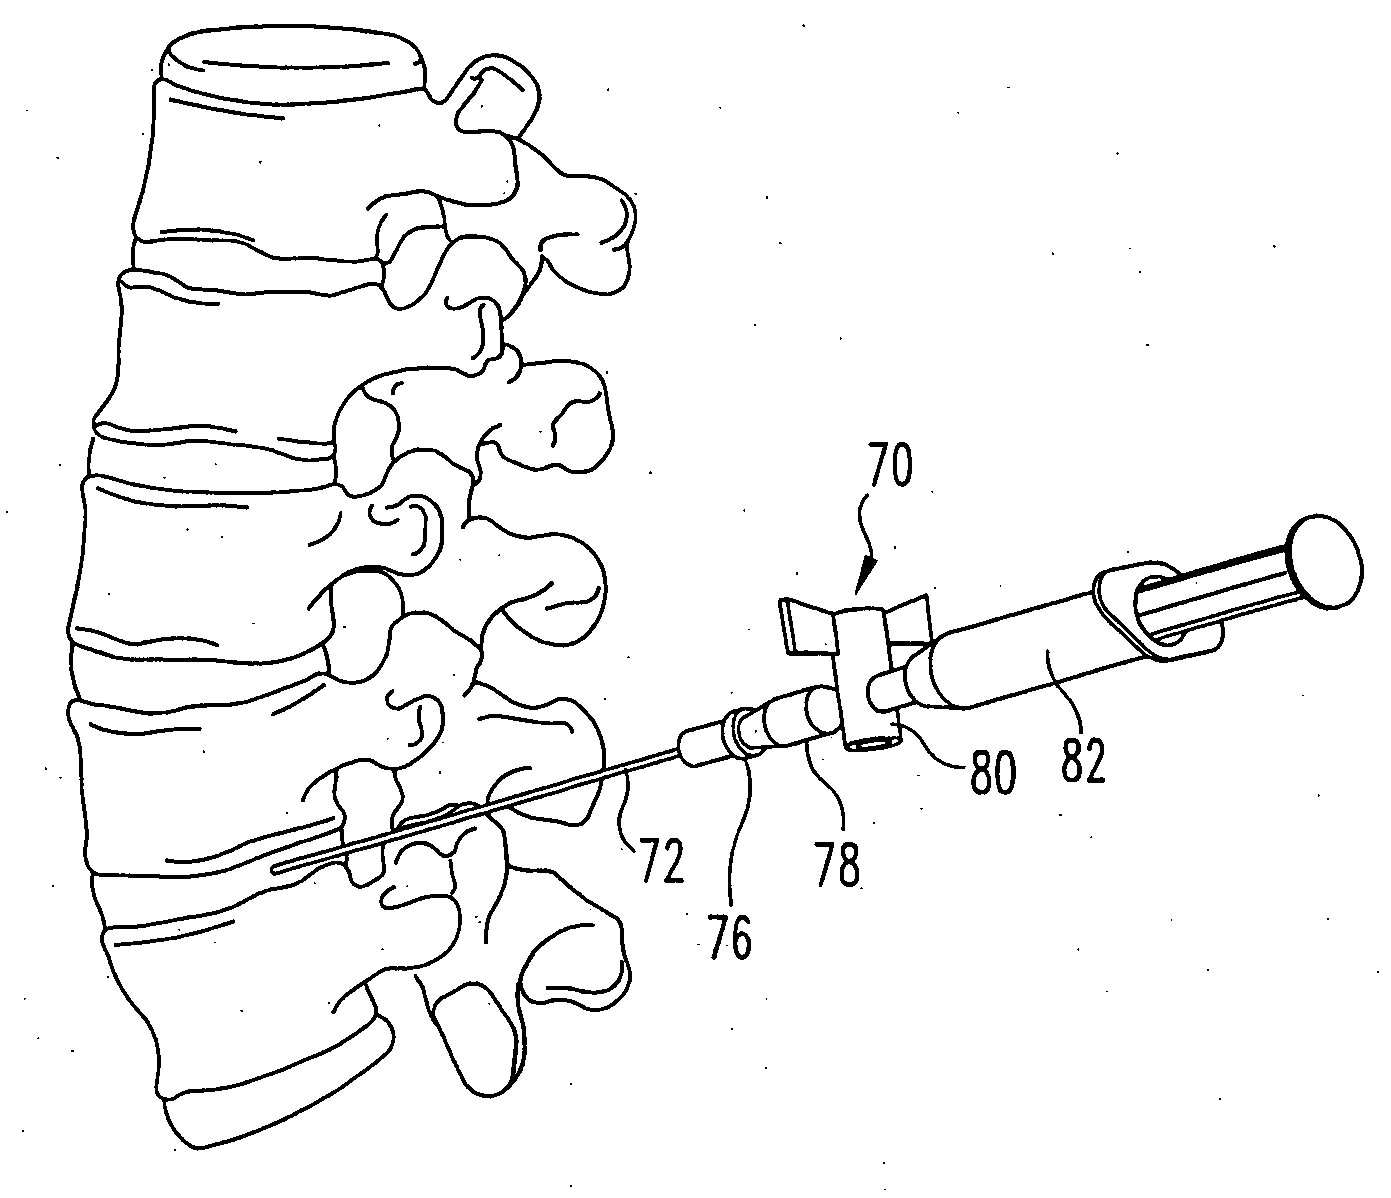 Percutaneous methods for injecting a curable biomaterial into an intervertebral space